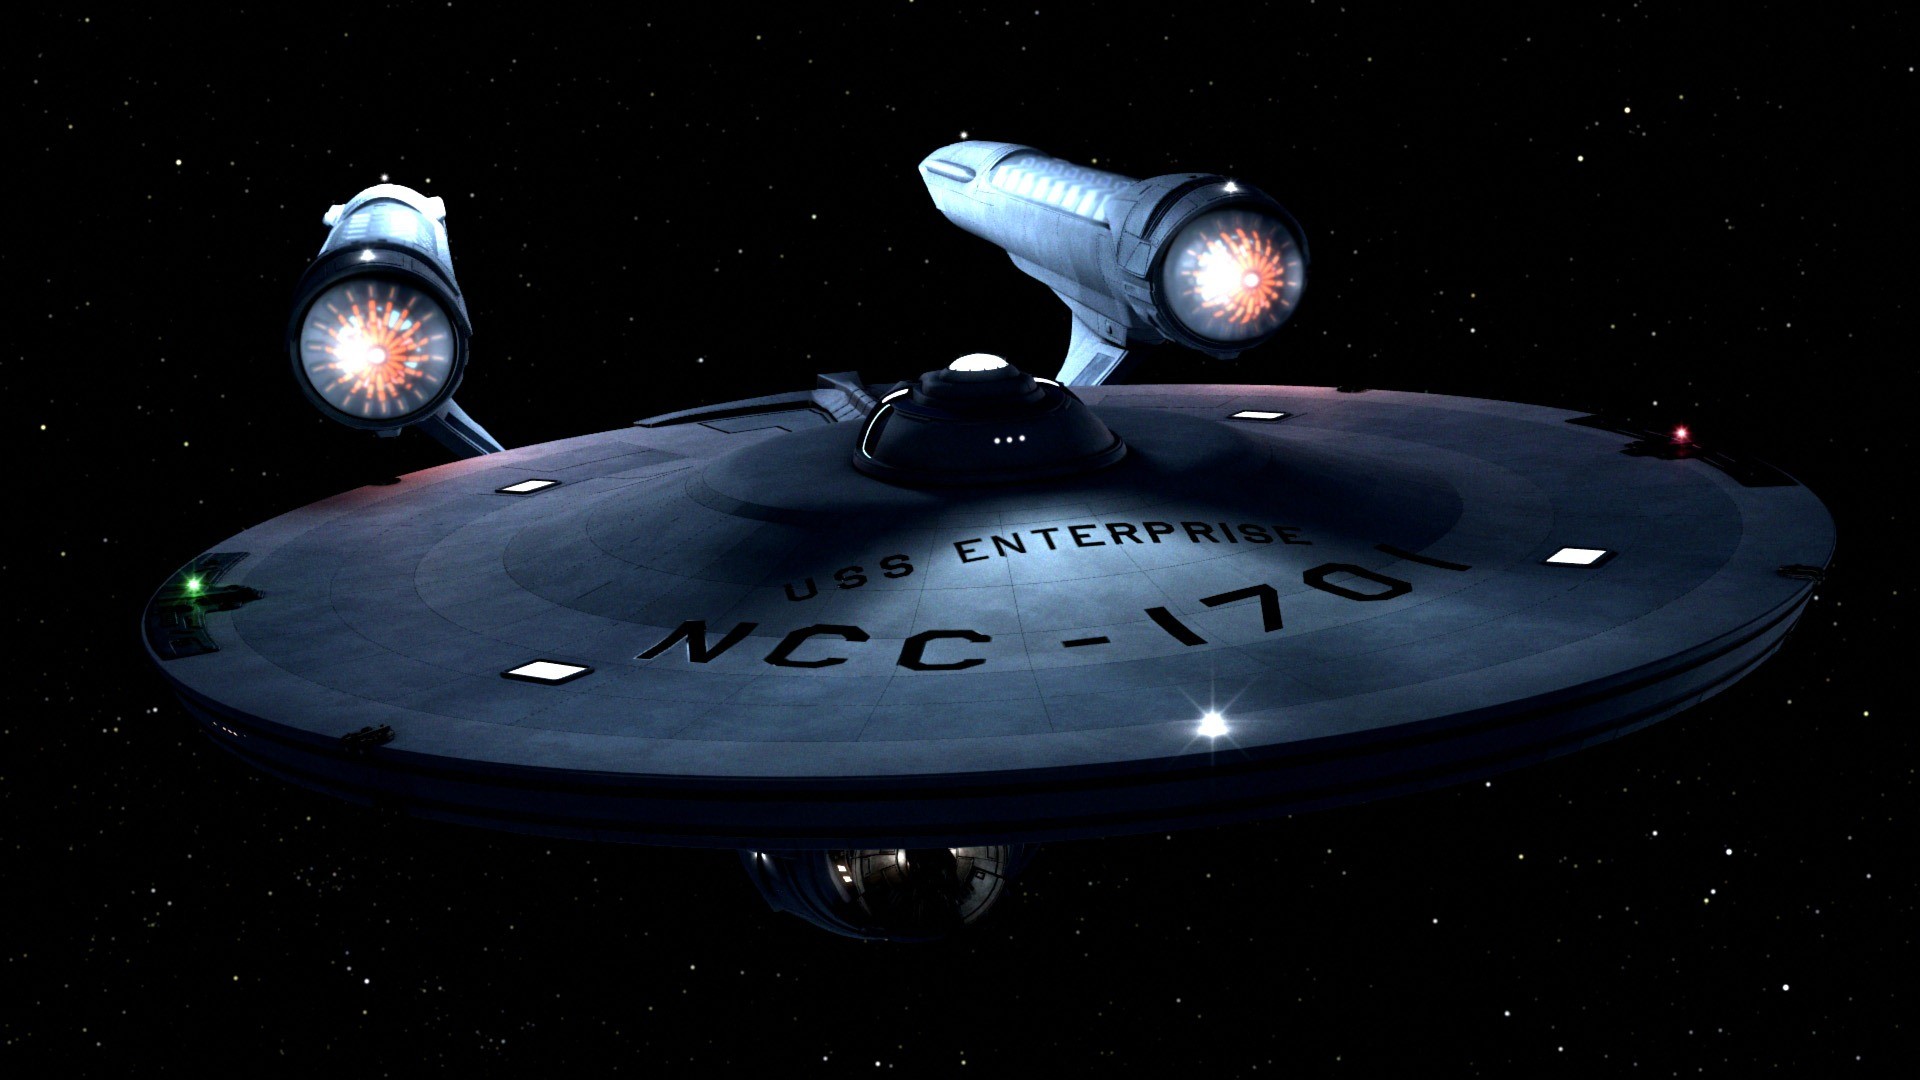 1920x1080 Just a nice image of the TOS Enterprise done in CGI (I think).